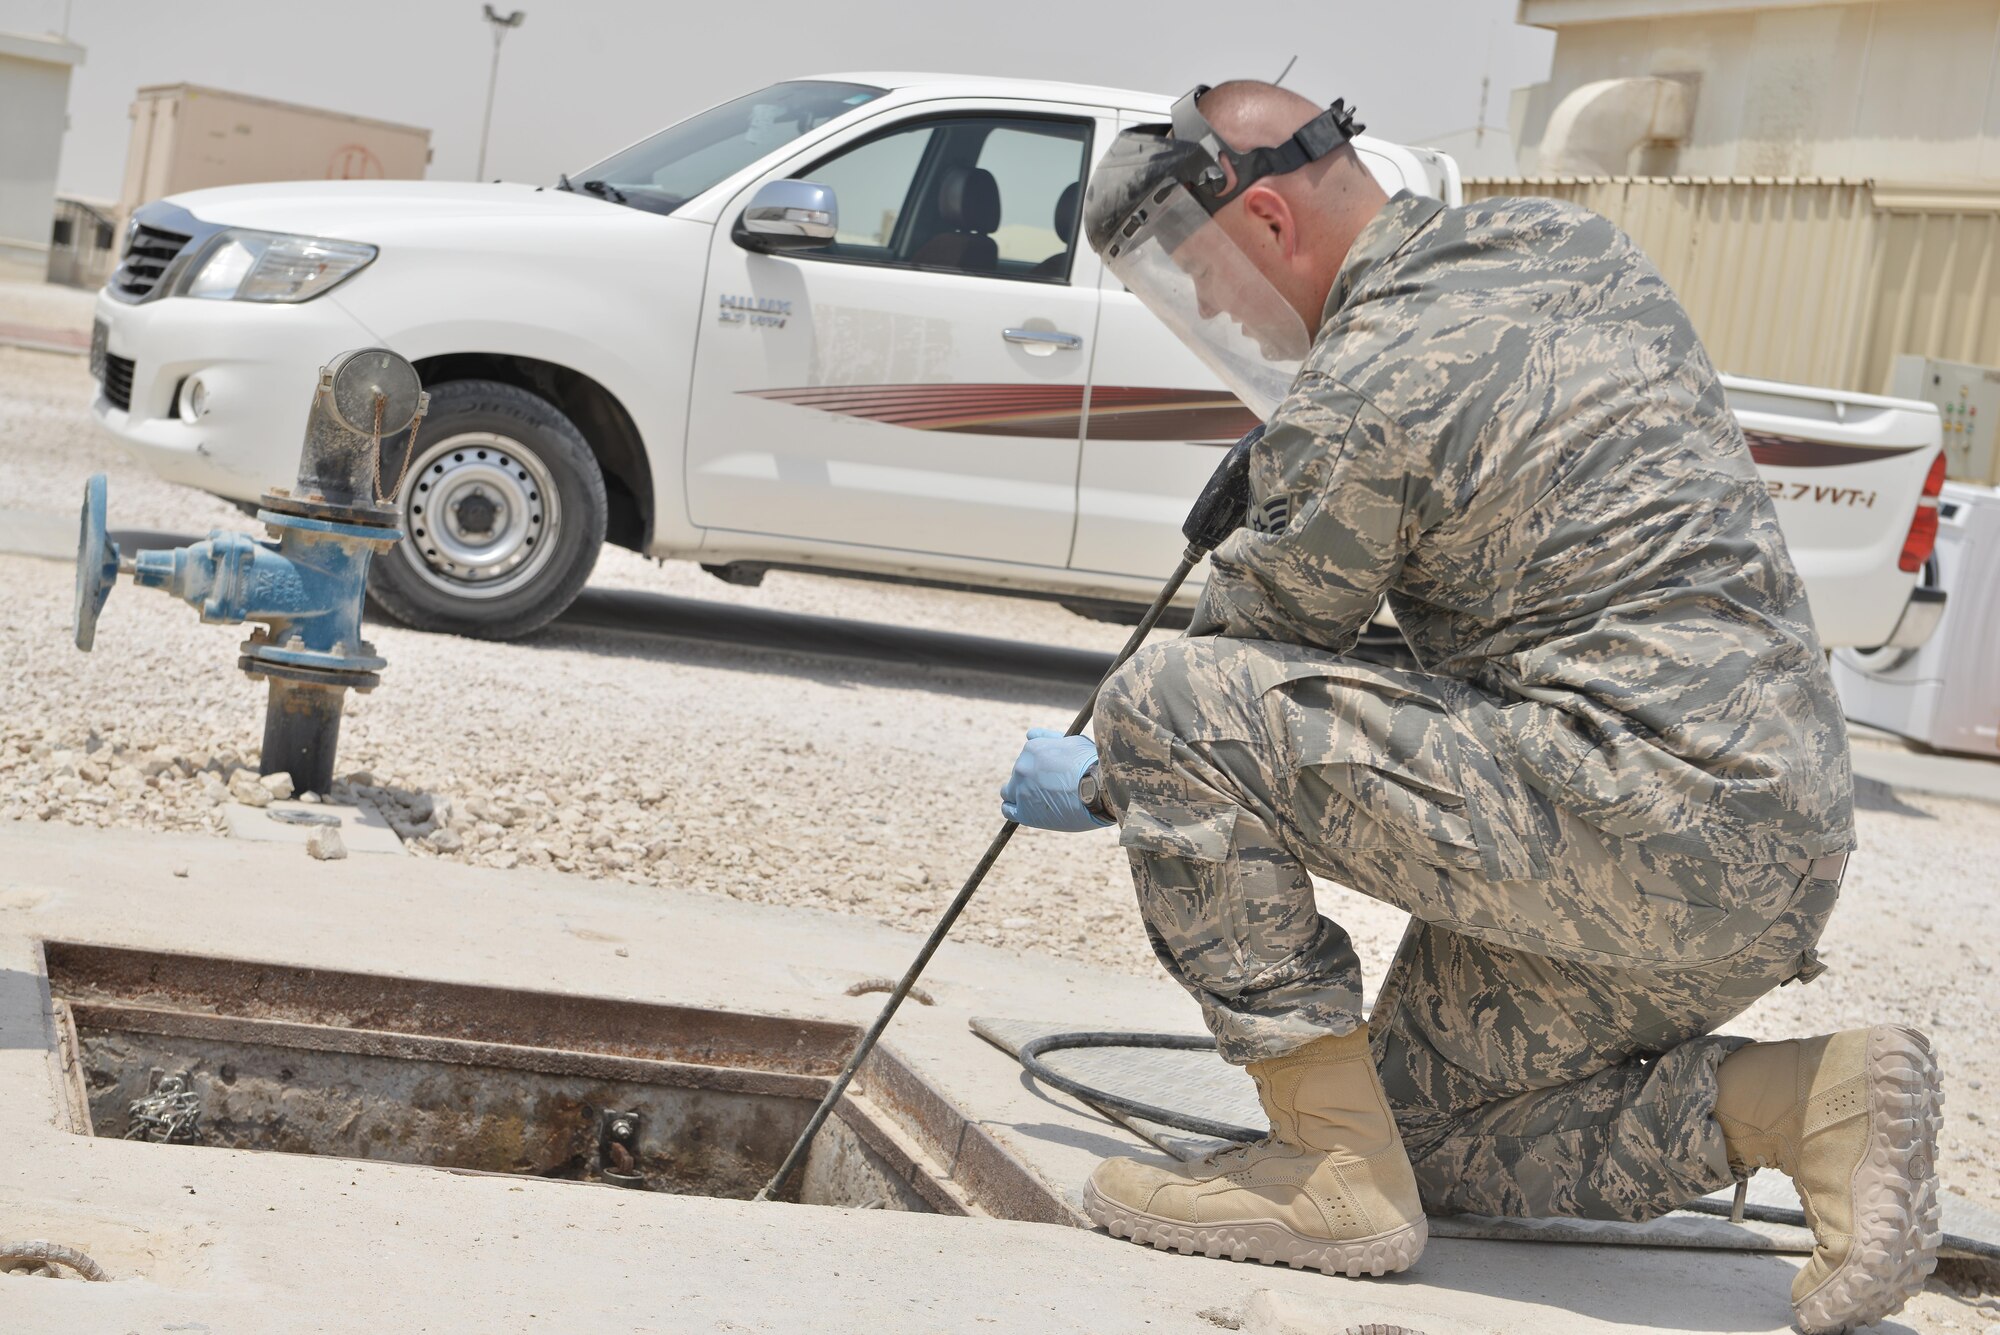 Airman 1st Class Joshua Rickerd, 379th Expeditionary Civil Engineer Squadron water and fuels, sprays down a lift station with water to keep bacteria and mold from backing up the plumbing system August 14, 2015 at Al Udeid Air Base, Qatar. Waste water is tested and monitored daily to ensure the systems are running smoothly and do not back up. With the high number of deployed members here at Al Udeid, the airmen stay busy day and night keeping the septic systems running to support the base. (U.S. Air Force photo/ Staff Sgt. Alexandre Montes